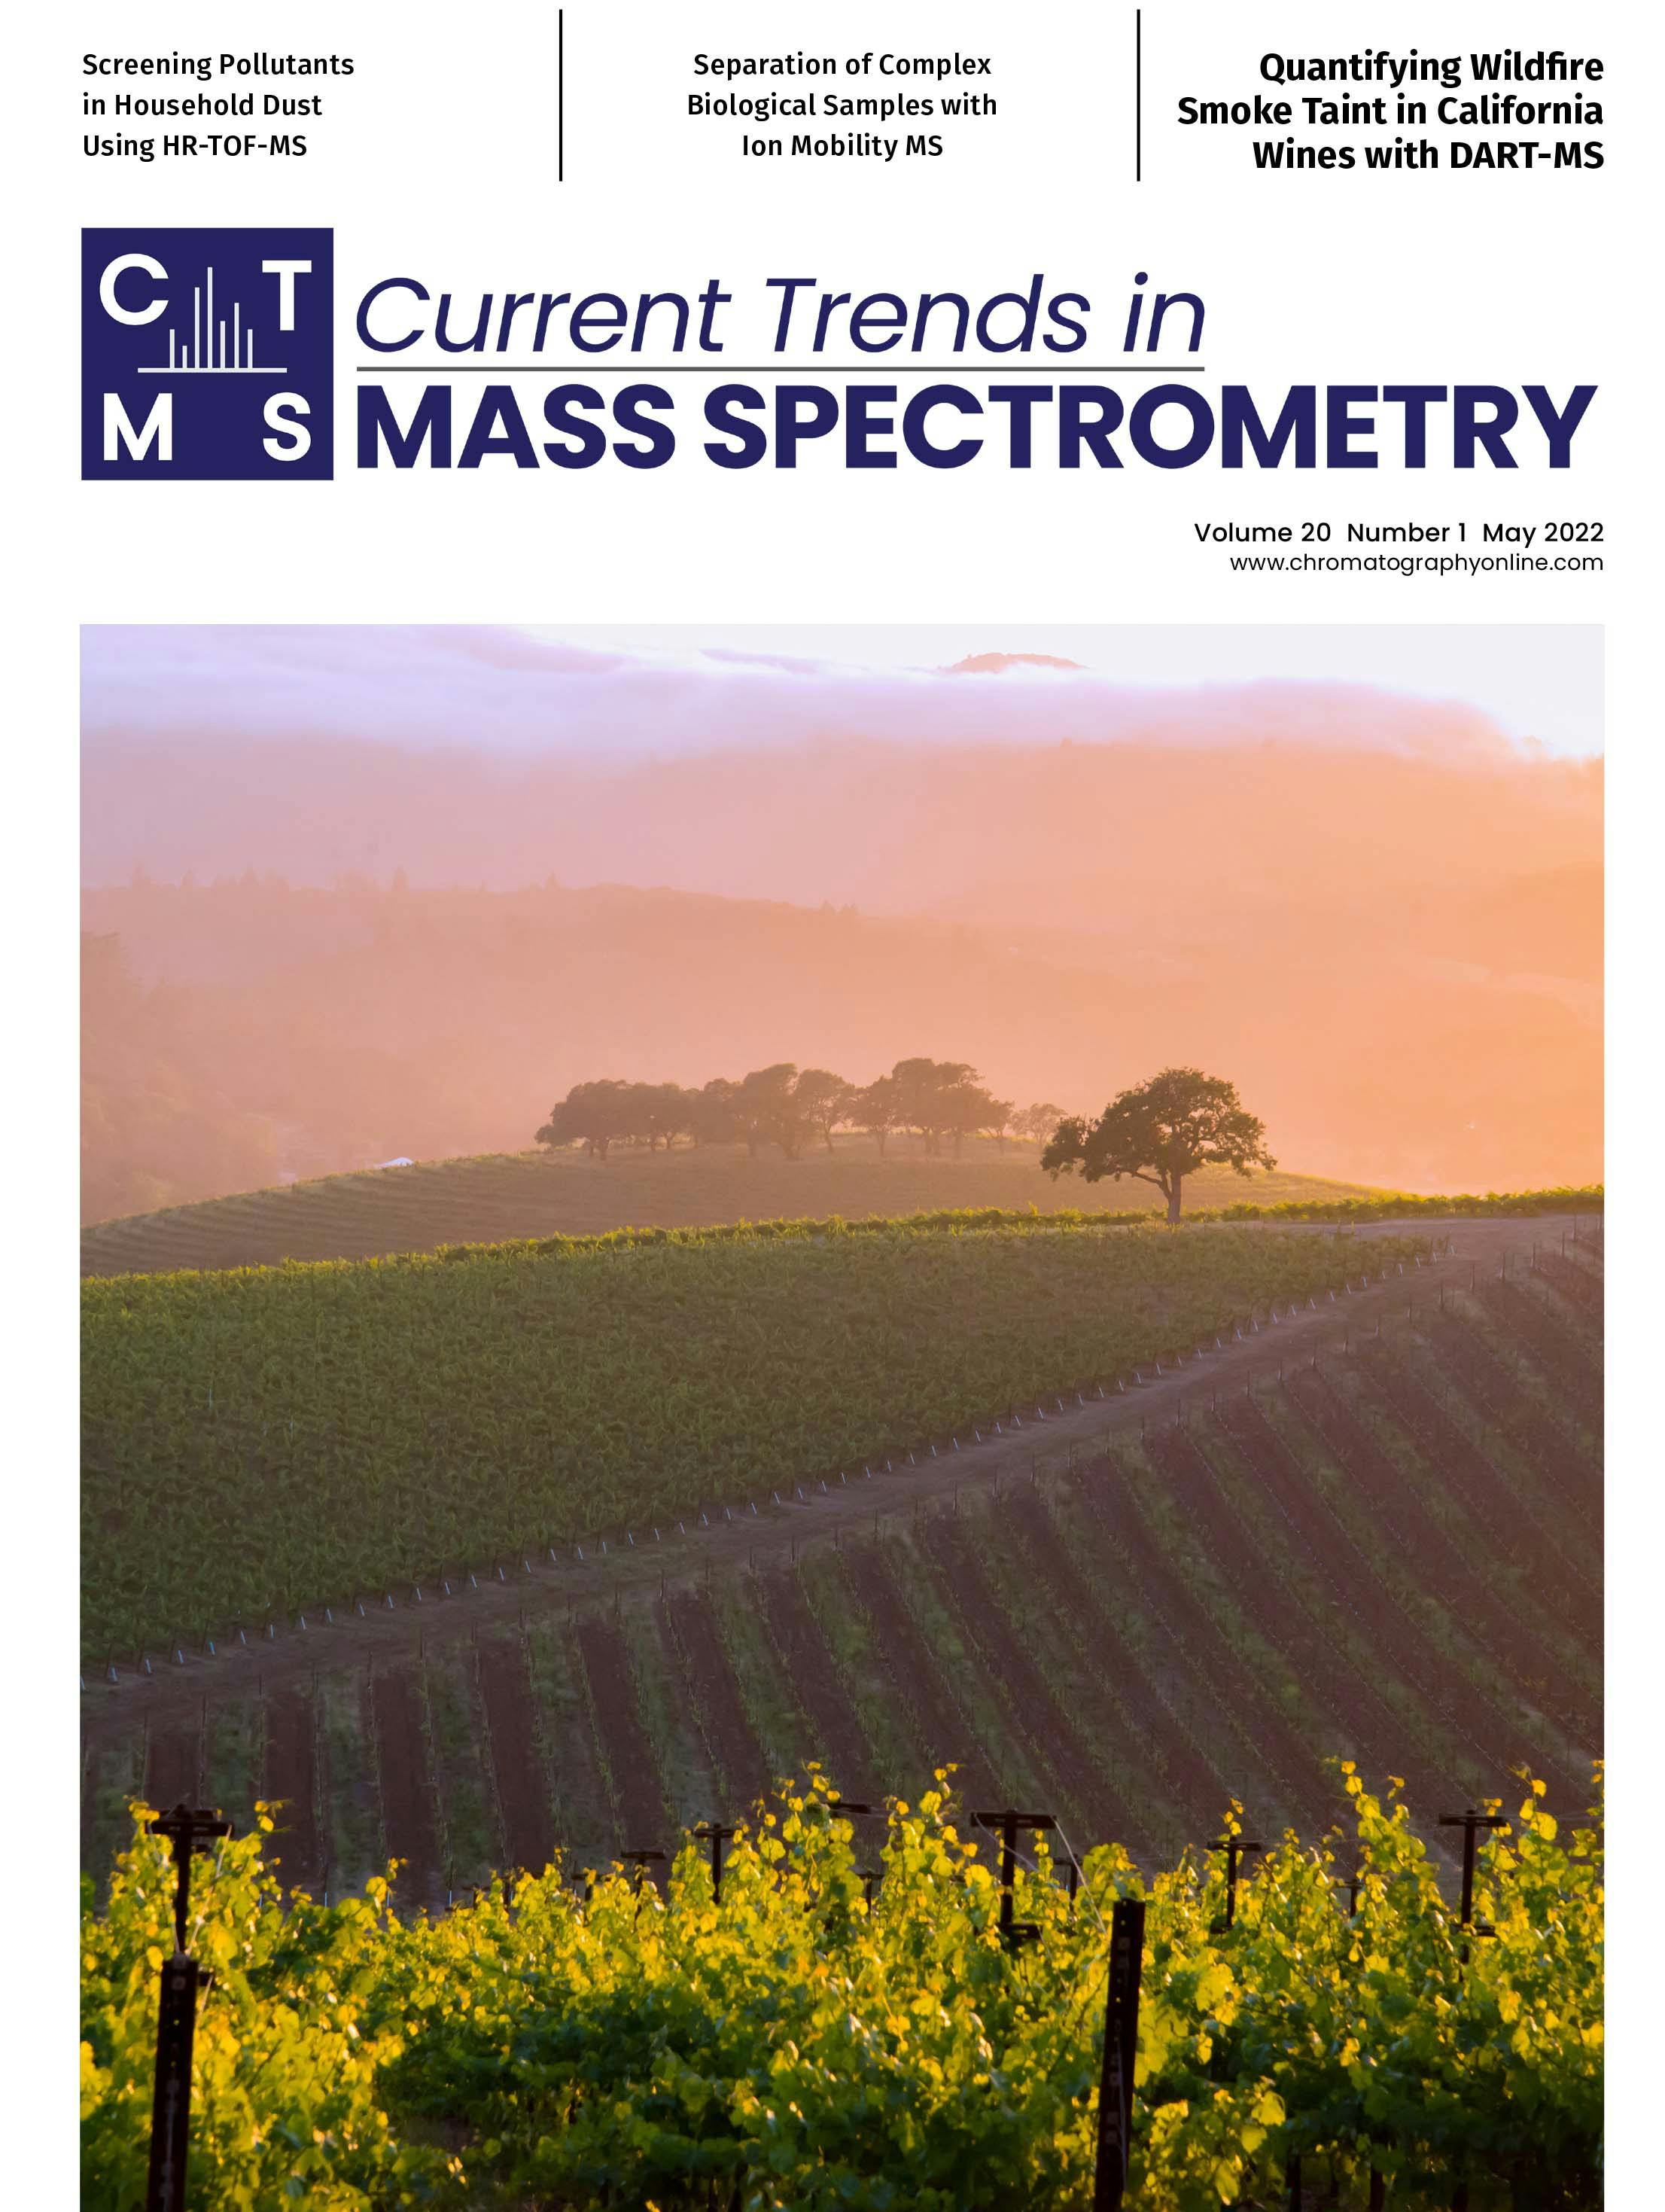 Current Trends in Mass Spectrometry